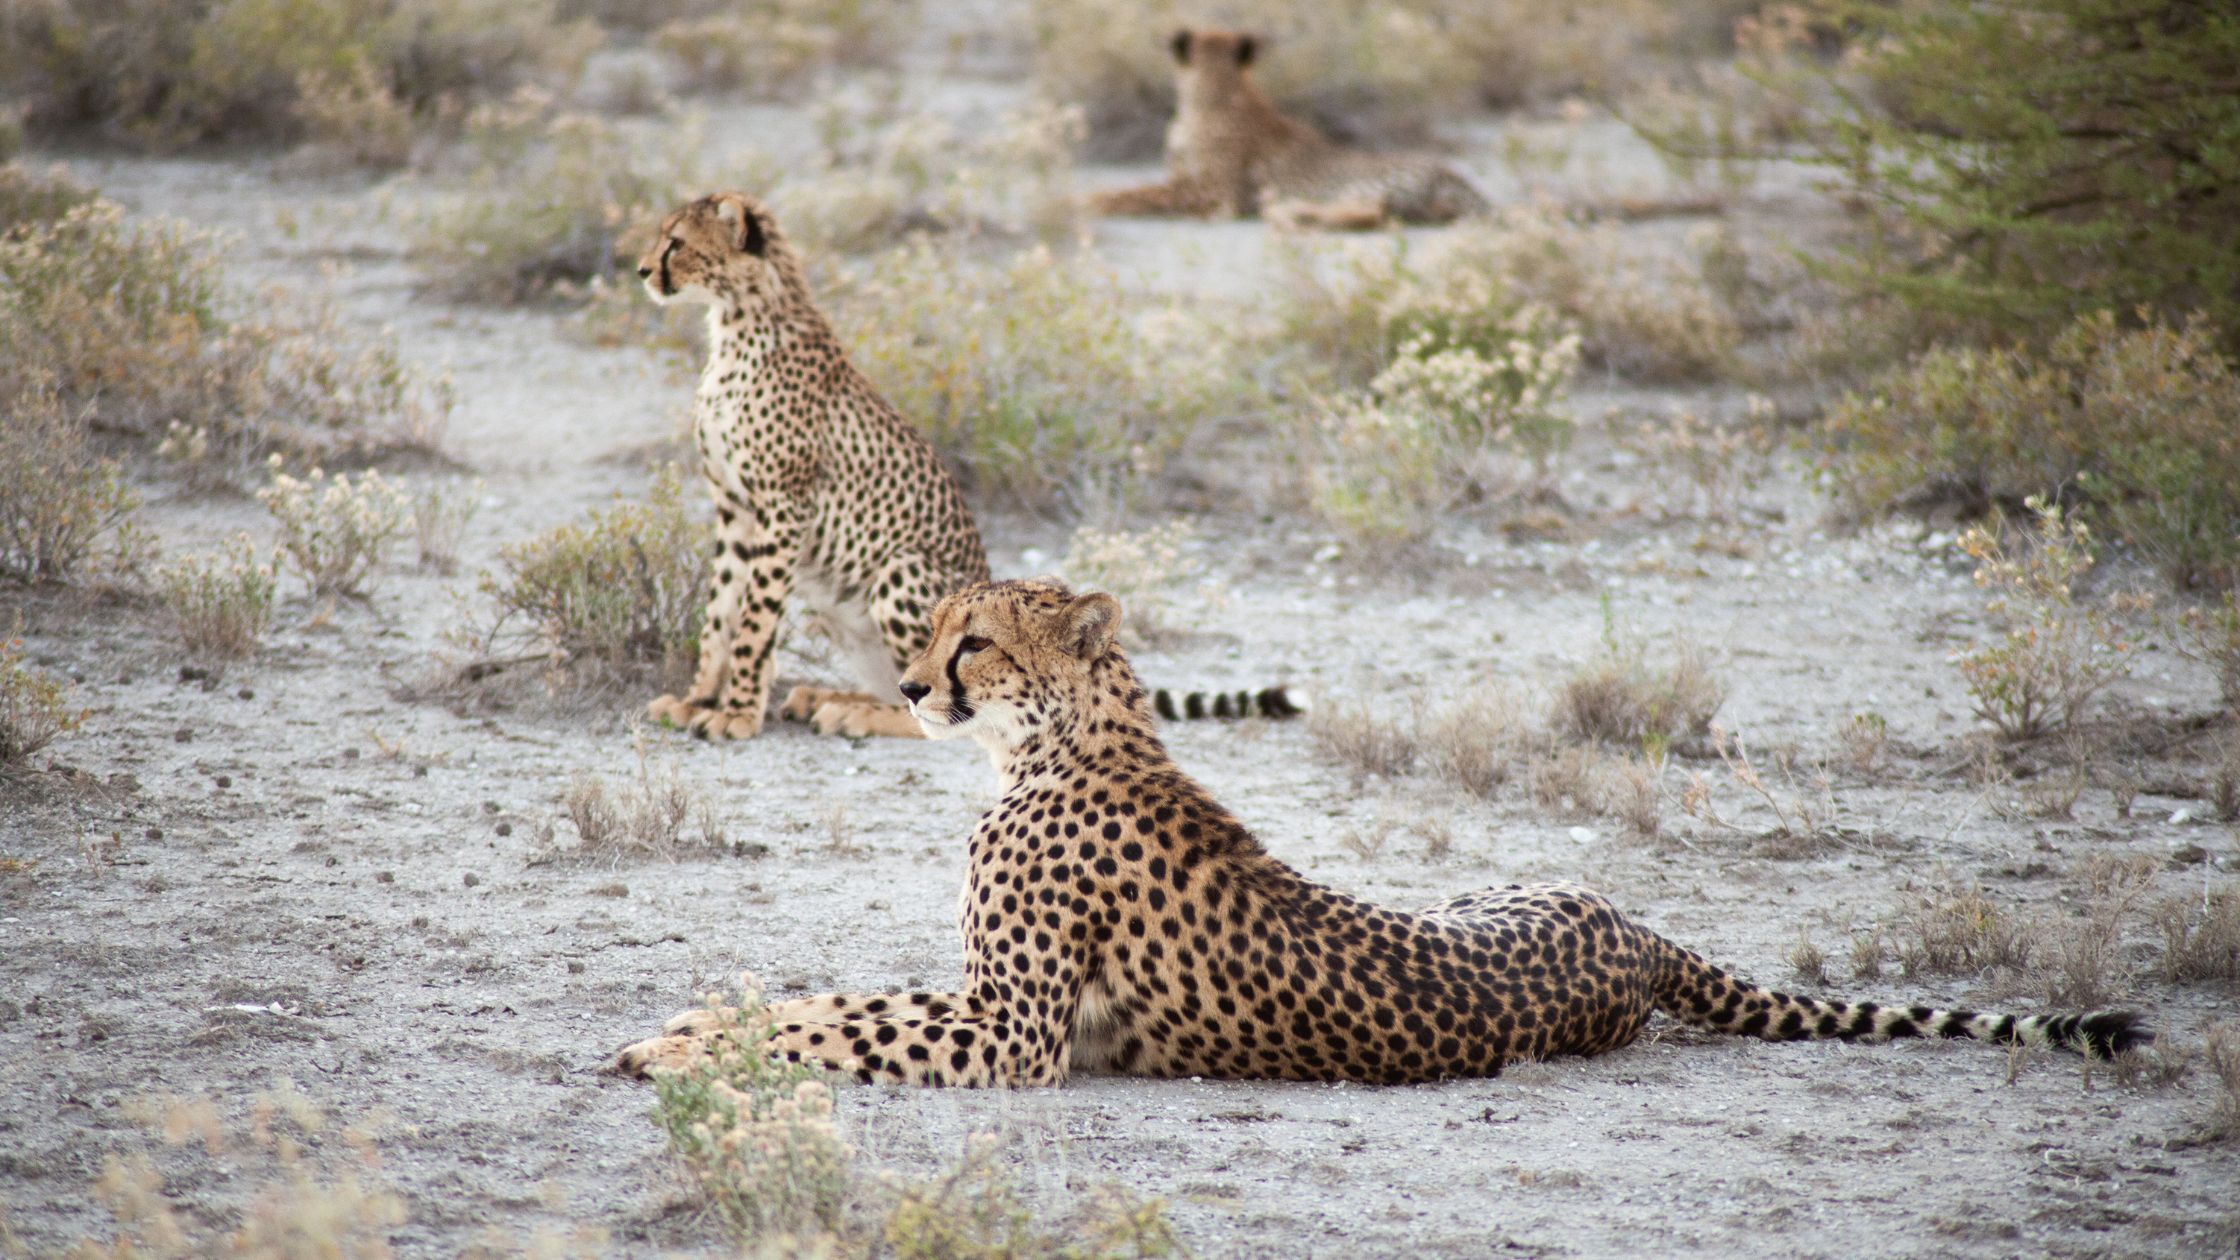 Two cheetahs lounging in the wild, spotted during a safari adventure with BND Car Hire in Namibia.